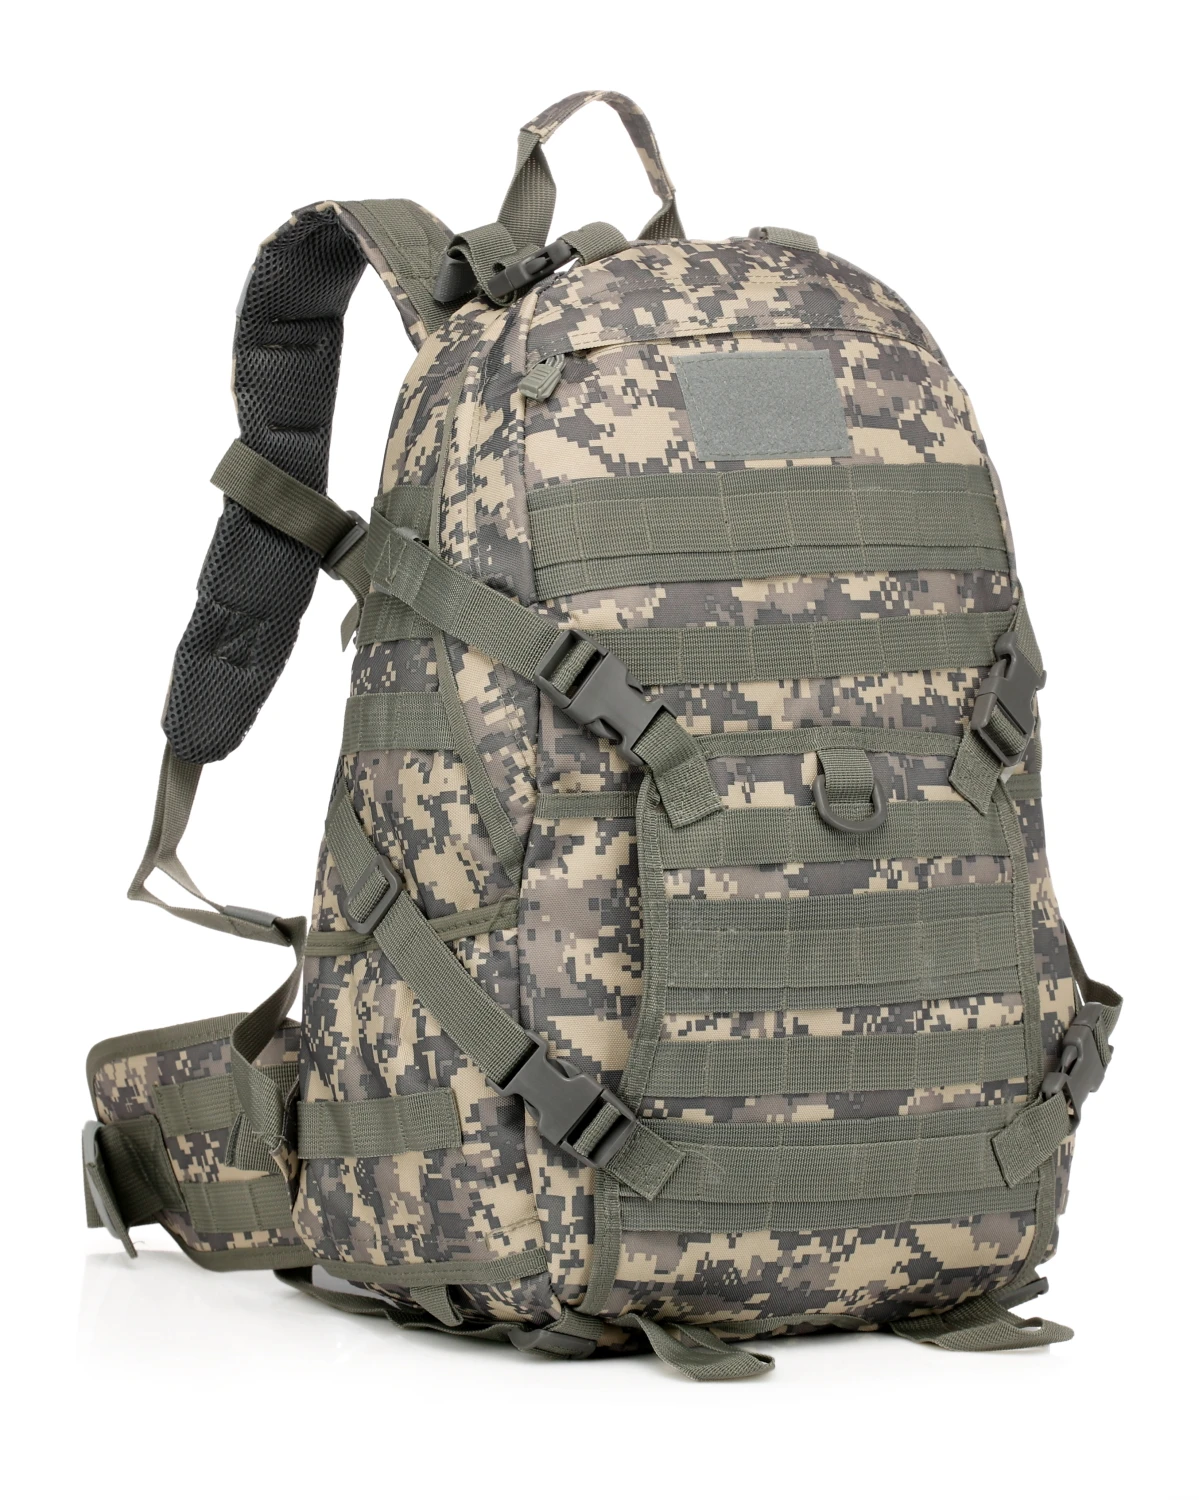 waterproof 35L tactical back pack army bag molle ACU camouflage backpack for hiking